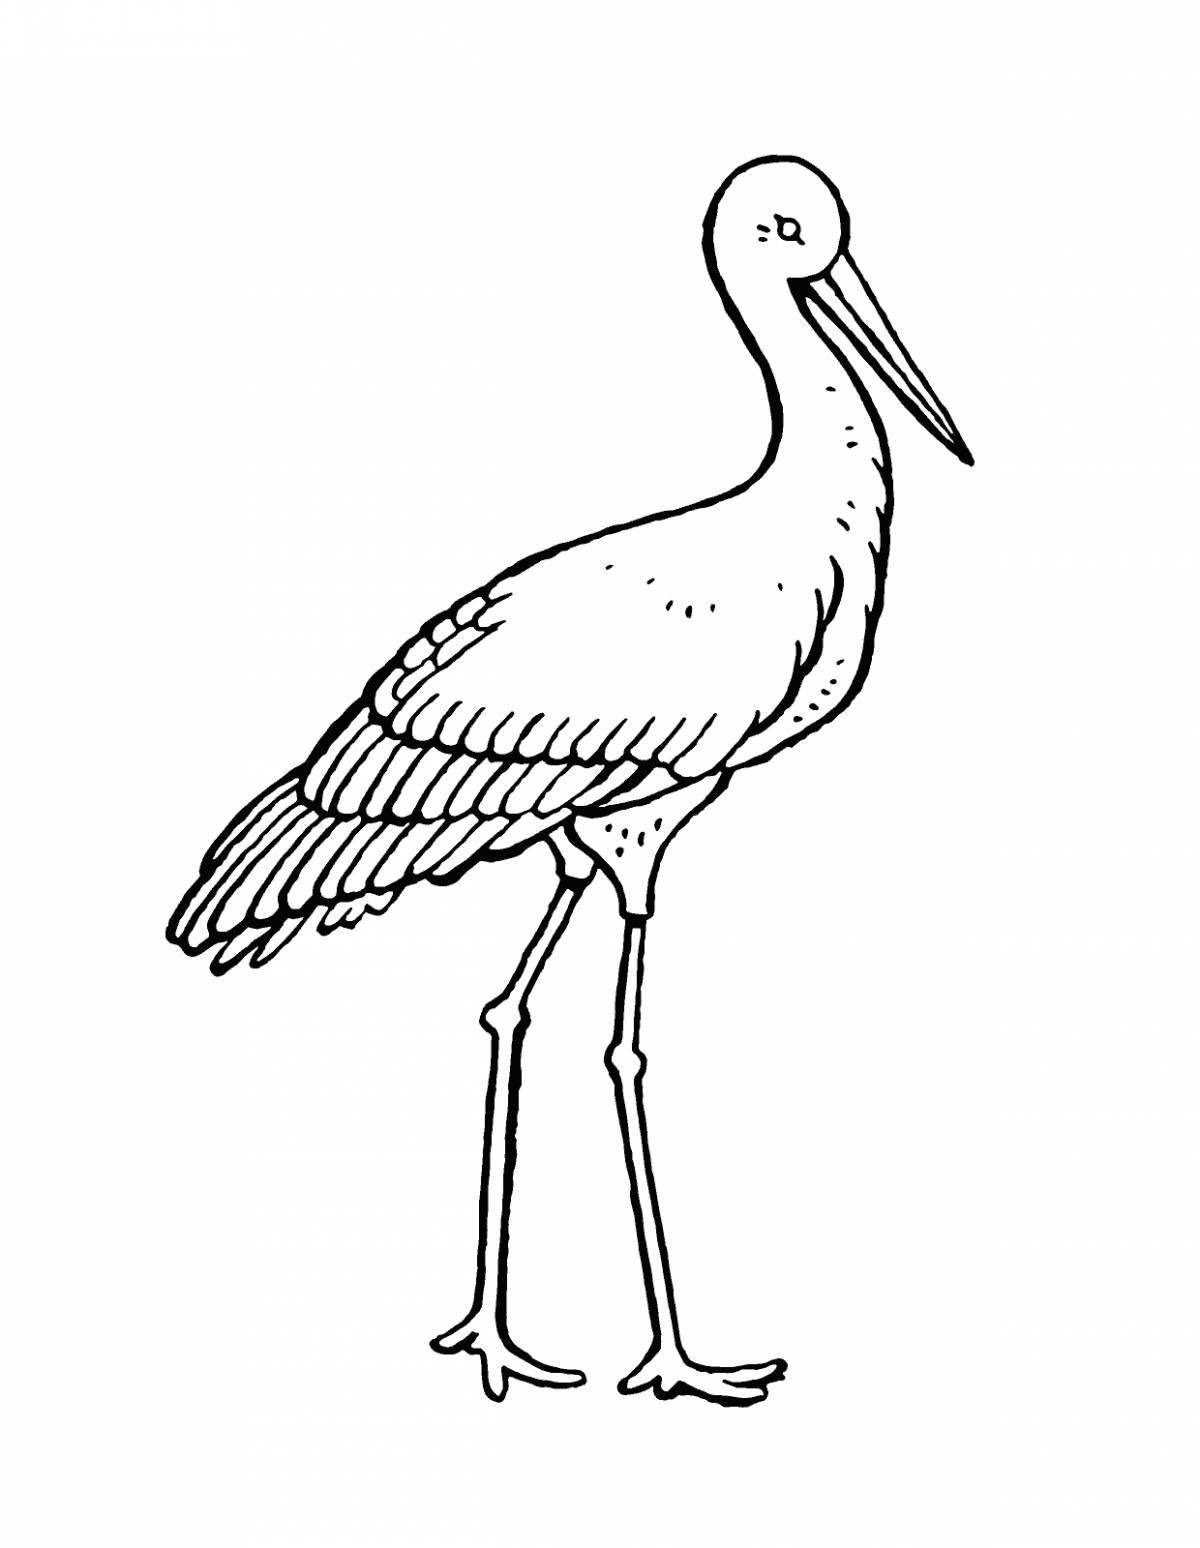 Wonderful stork coloring pages for kids